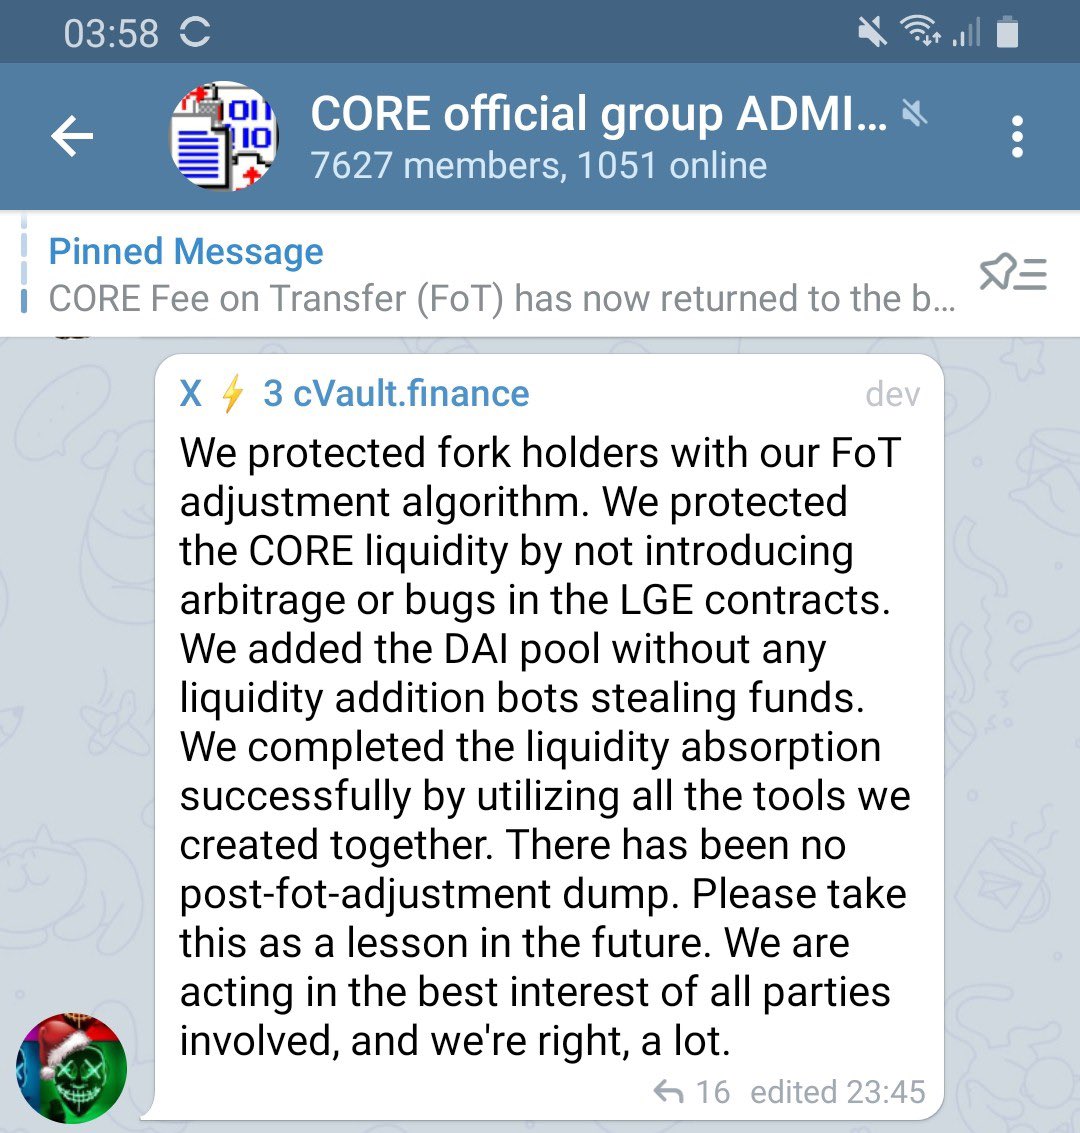 You understand we are just at the scaffolding phase. The initial locked liquidity that is absolutely necessary has been collected safely for ever expanding exponential growth. This was the reason for high fot and whatever short term nonsense fud that caused. See attached.4/12